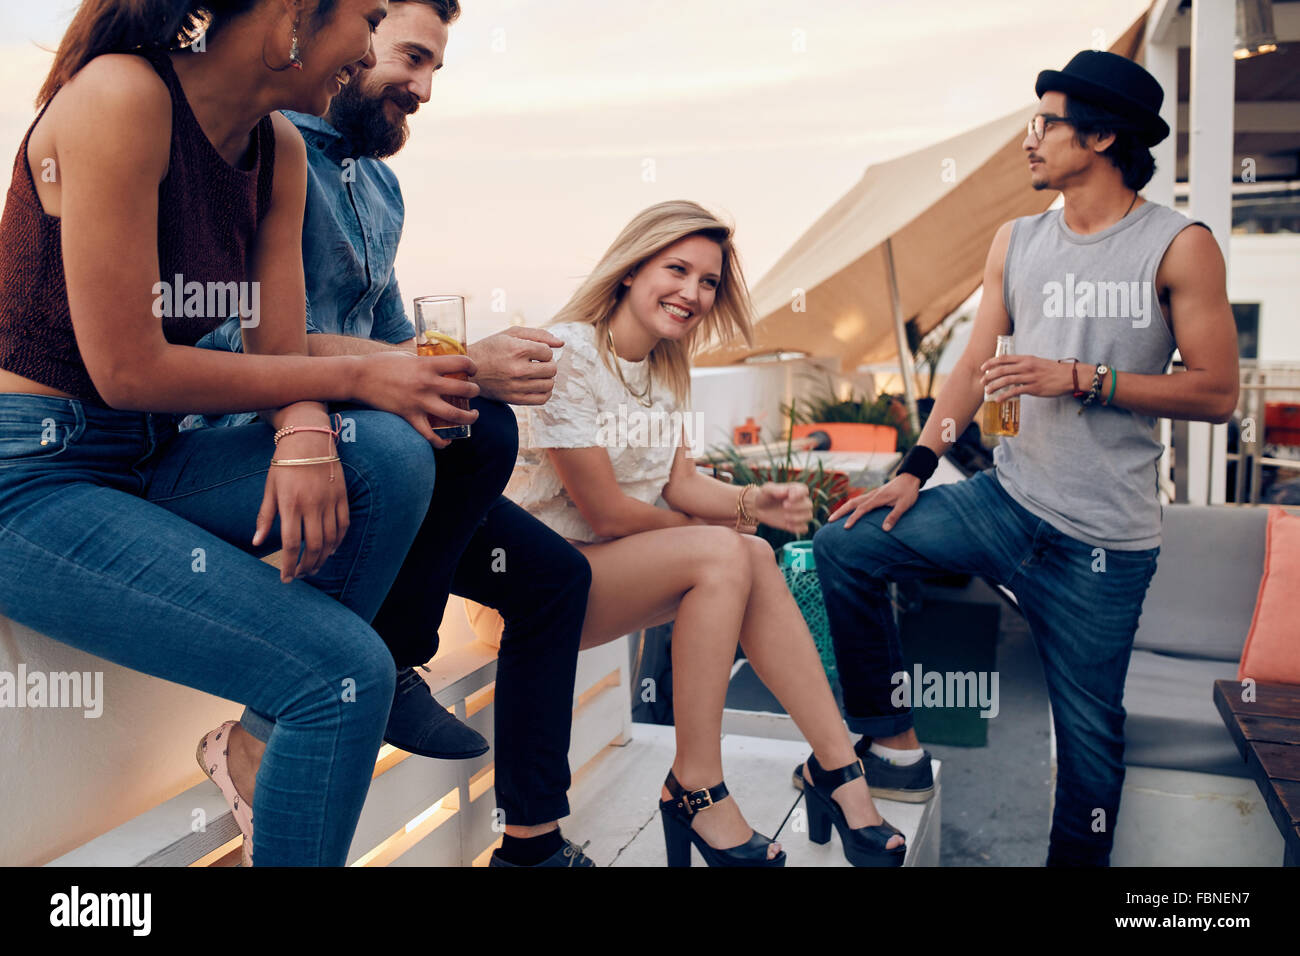 Group of friends hanging out on a rooftop having drinks. Young people partying together with cocktails. Stock Photo